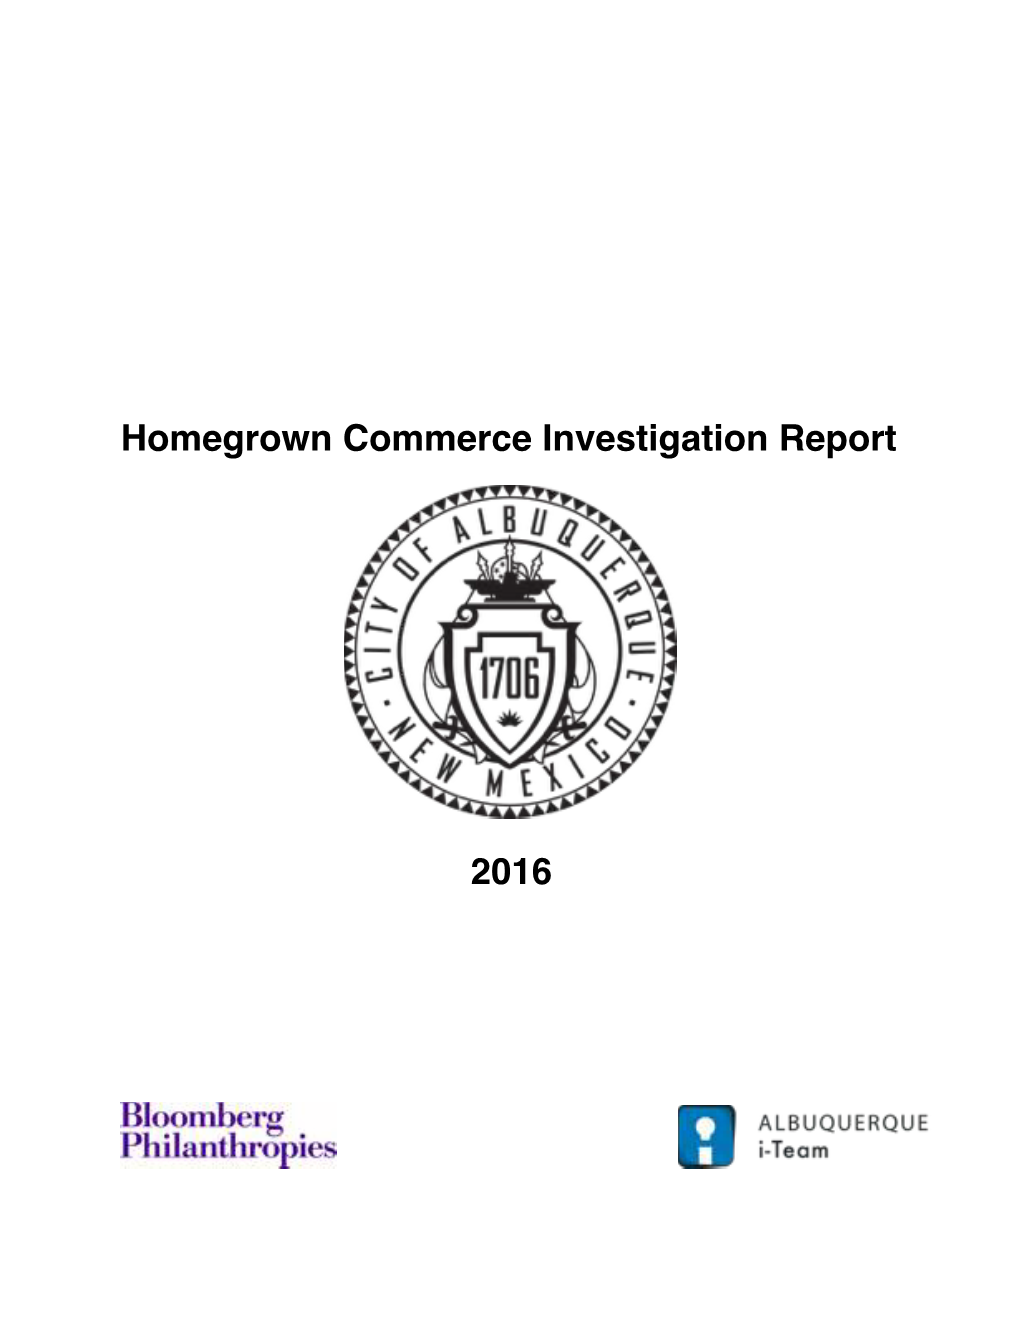 Homegrown Commerce Investigation Report 2016